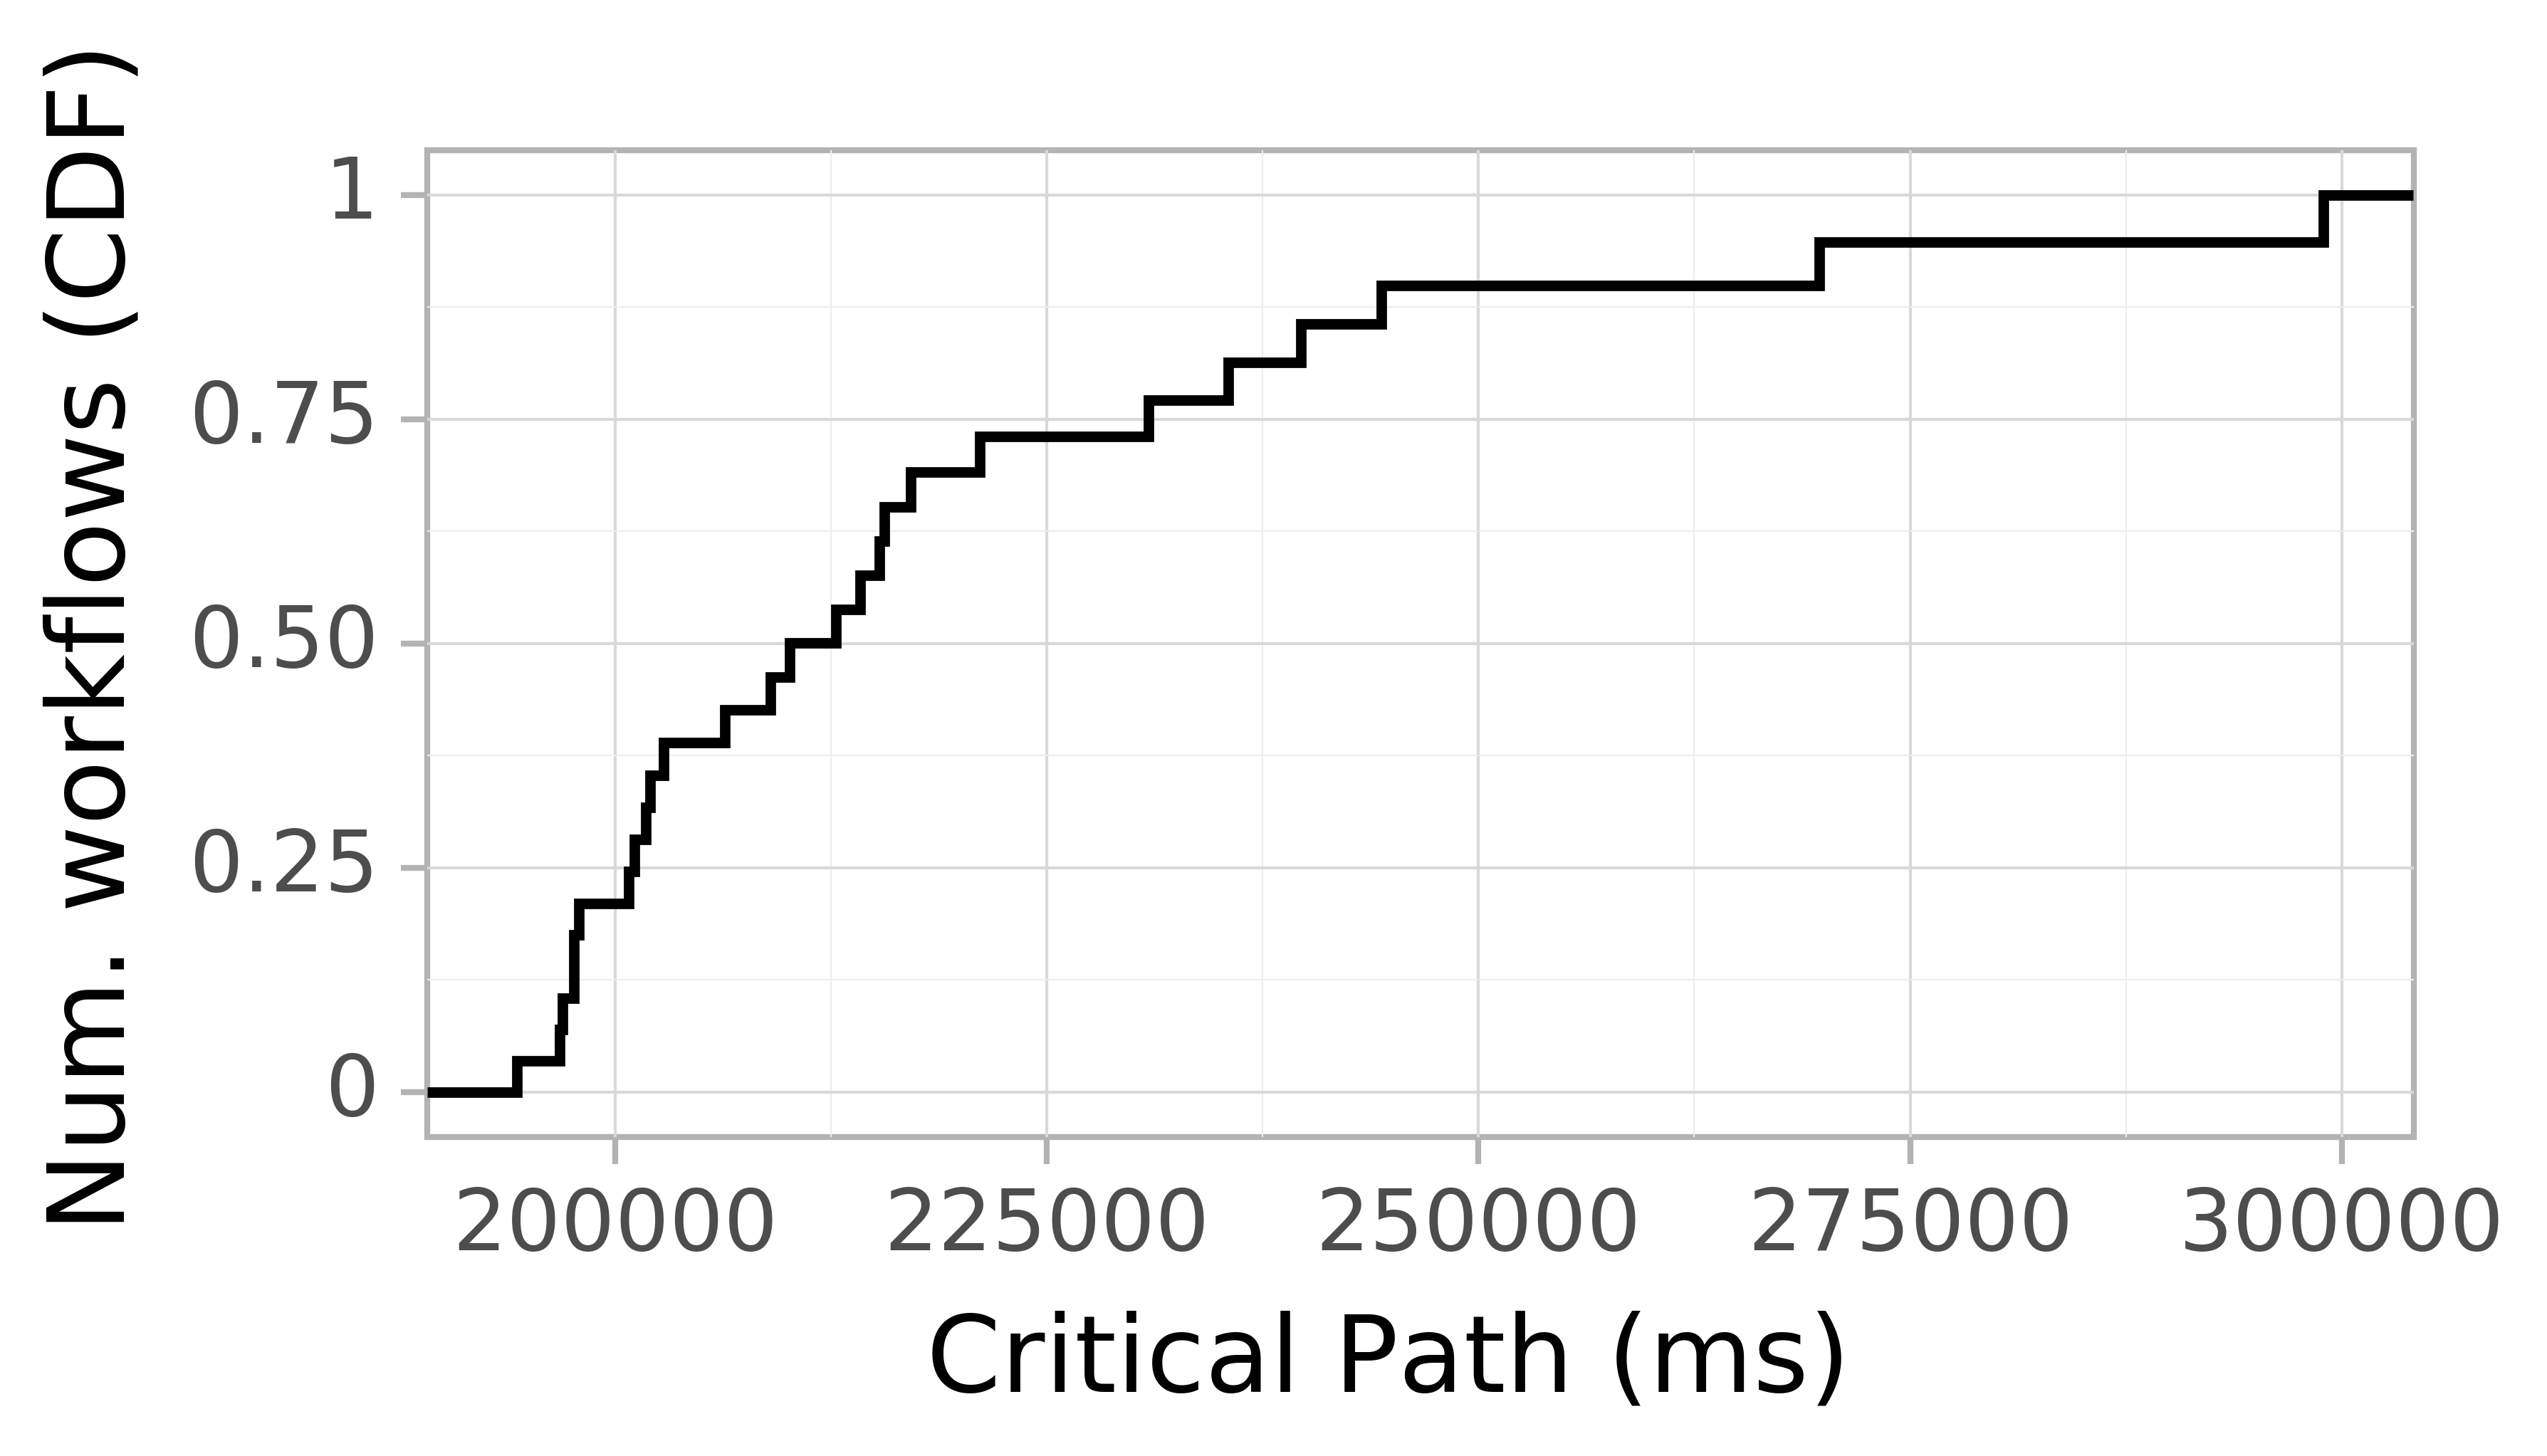 Job runtime CDF graph for the askalon-new_ee35 trace.